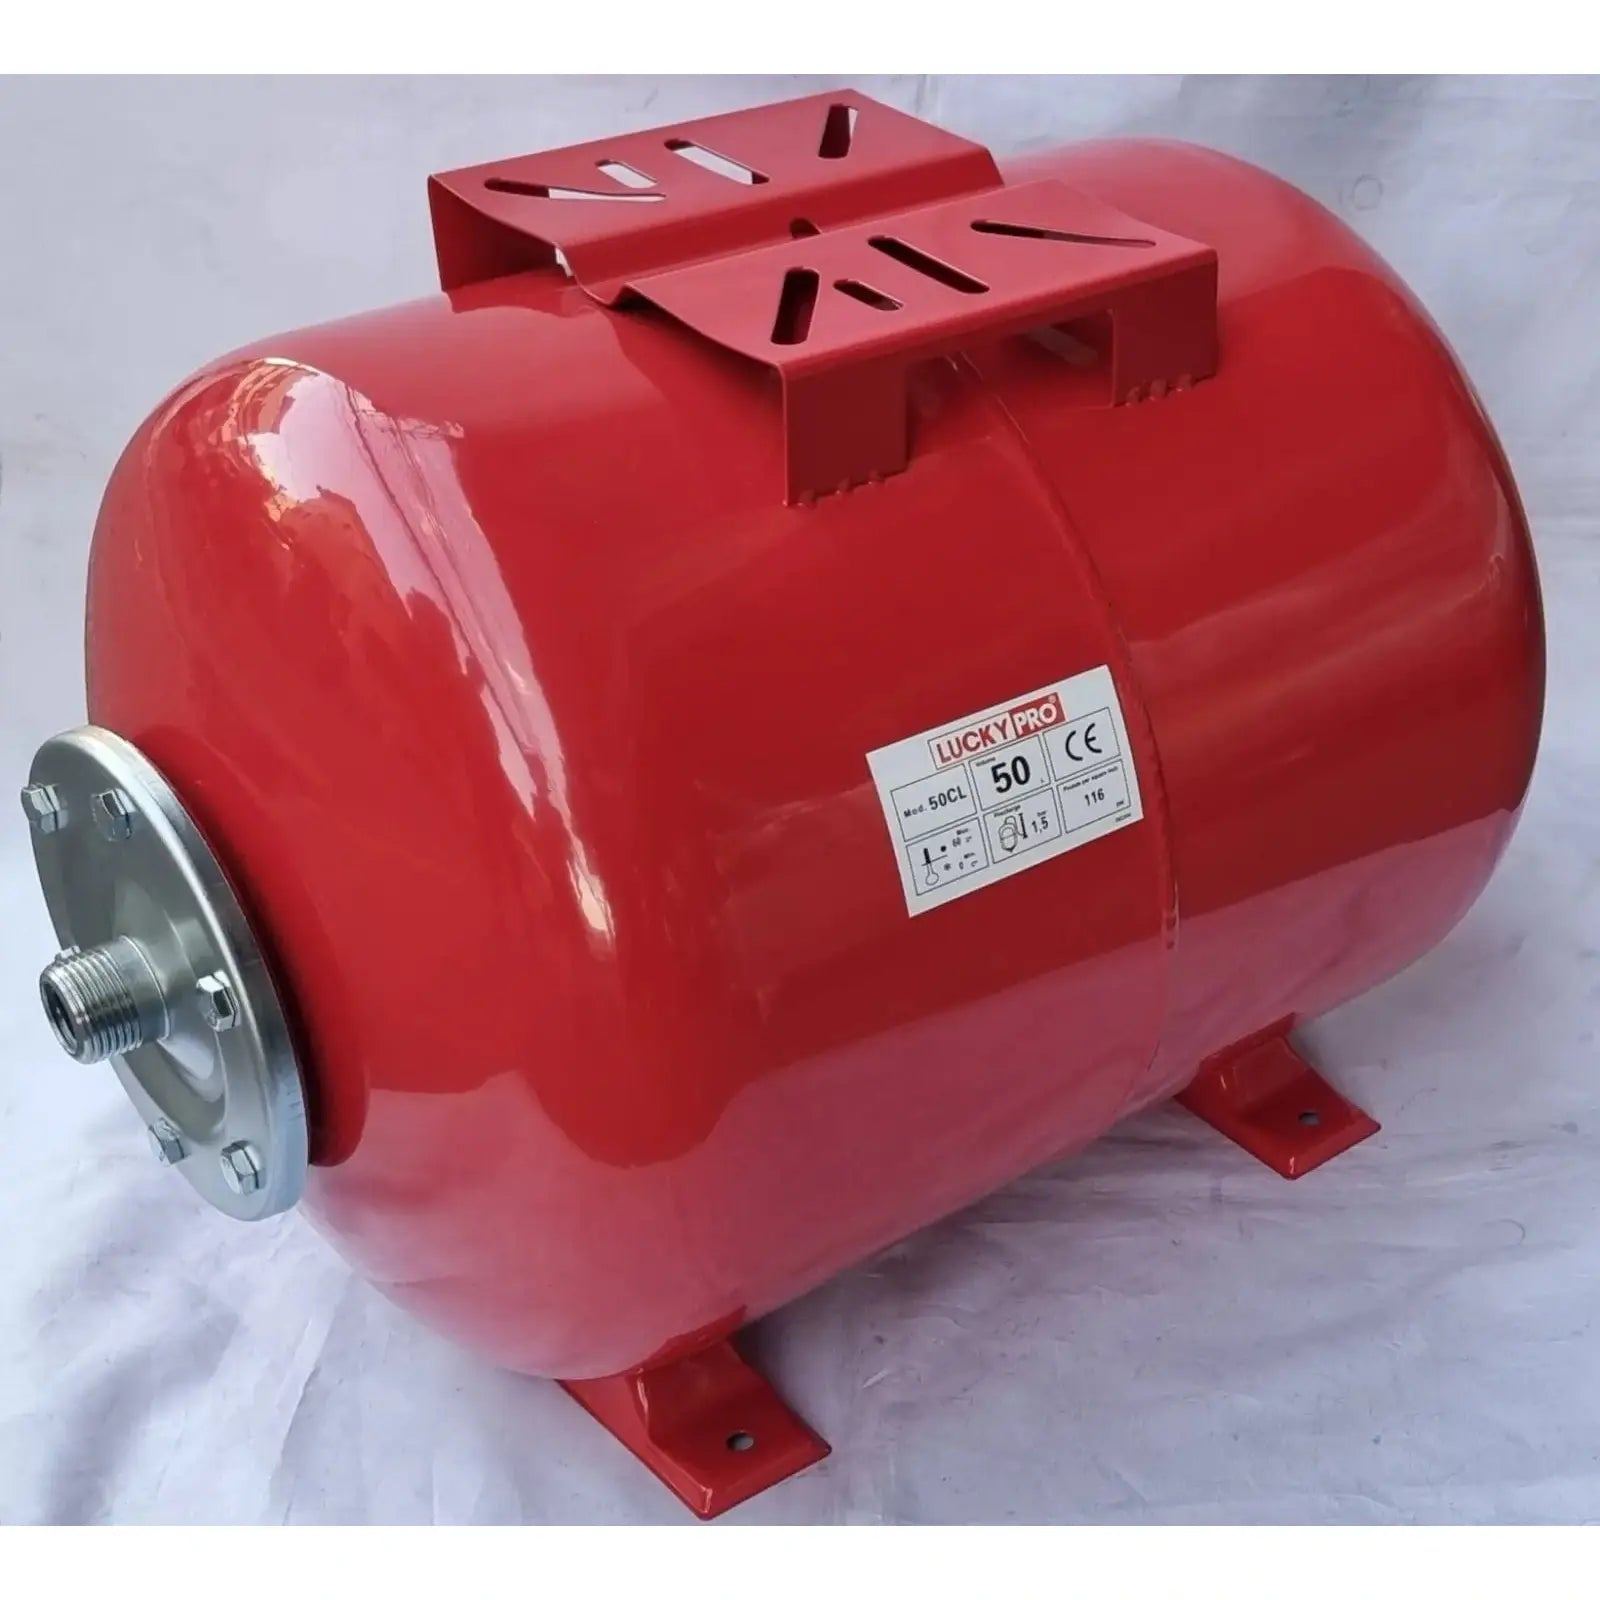 LuckyPro Spherical Bladder Pressure Tank - 24SF | Supply Master, Accra, Ghana Pump Control Buy Tools hardware Building materials